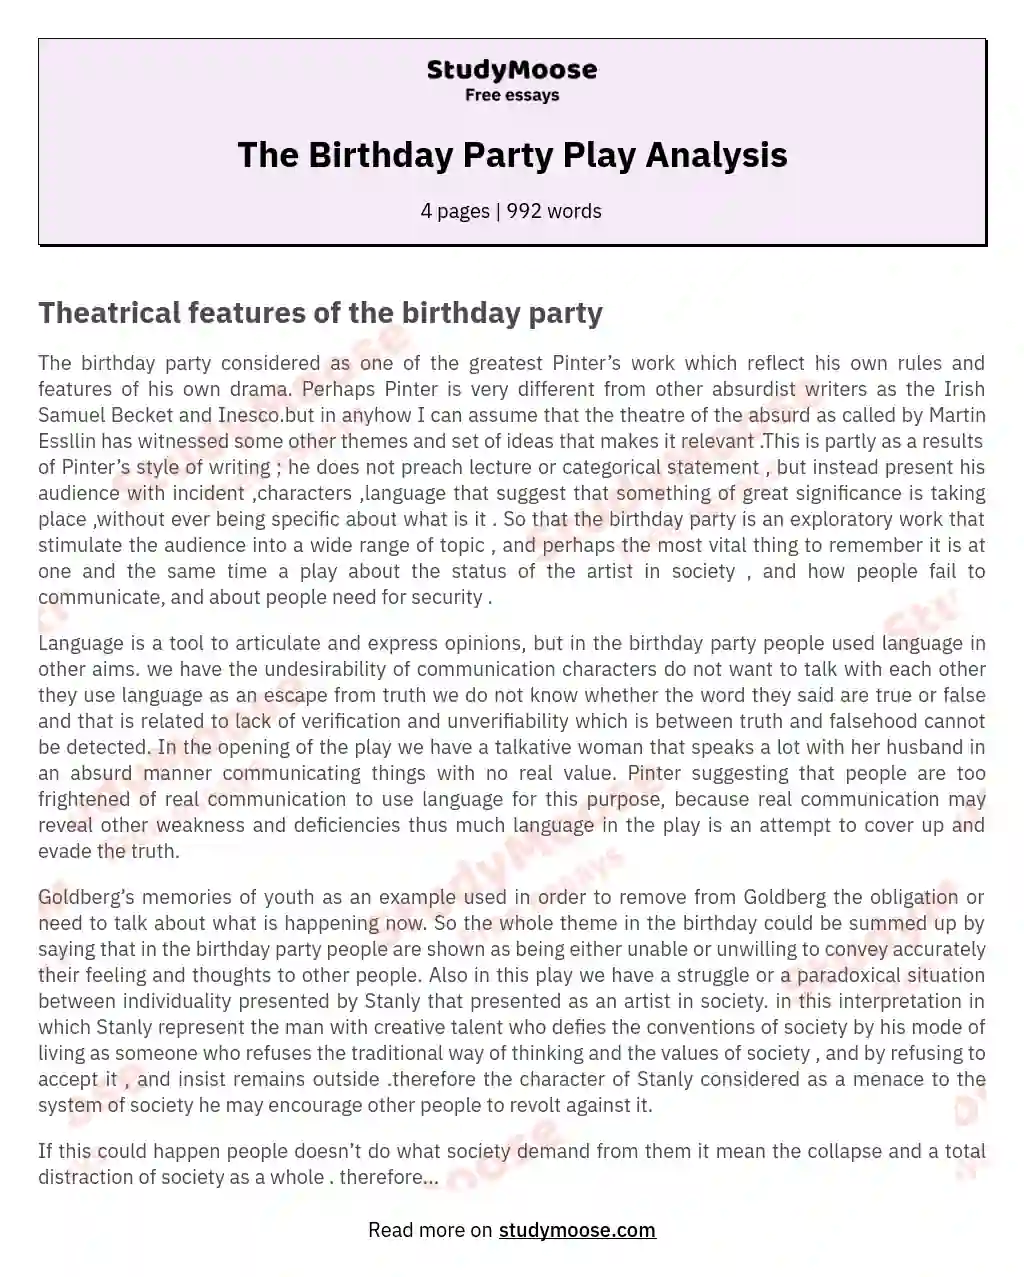 The Birthday Party Play Analysis essay